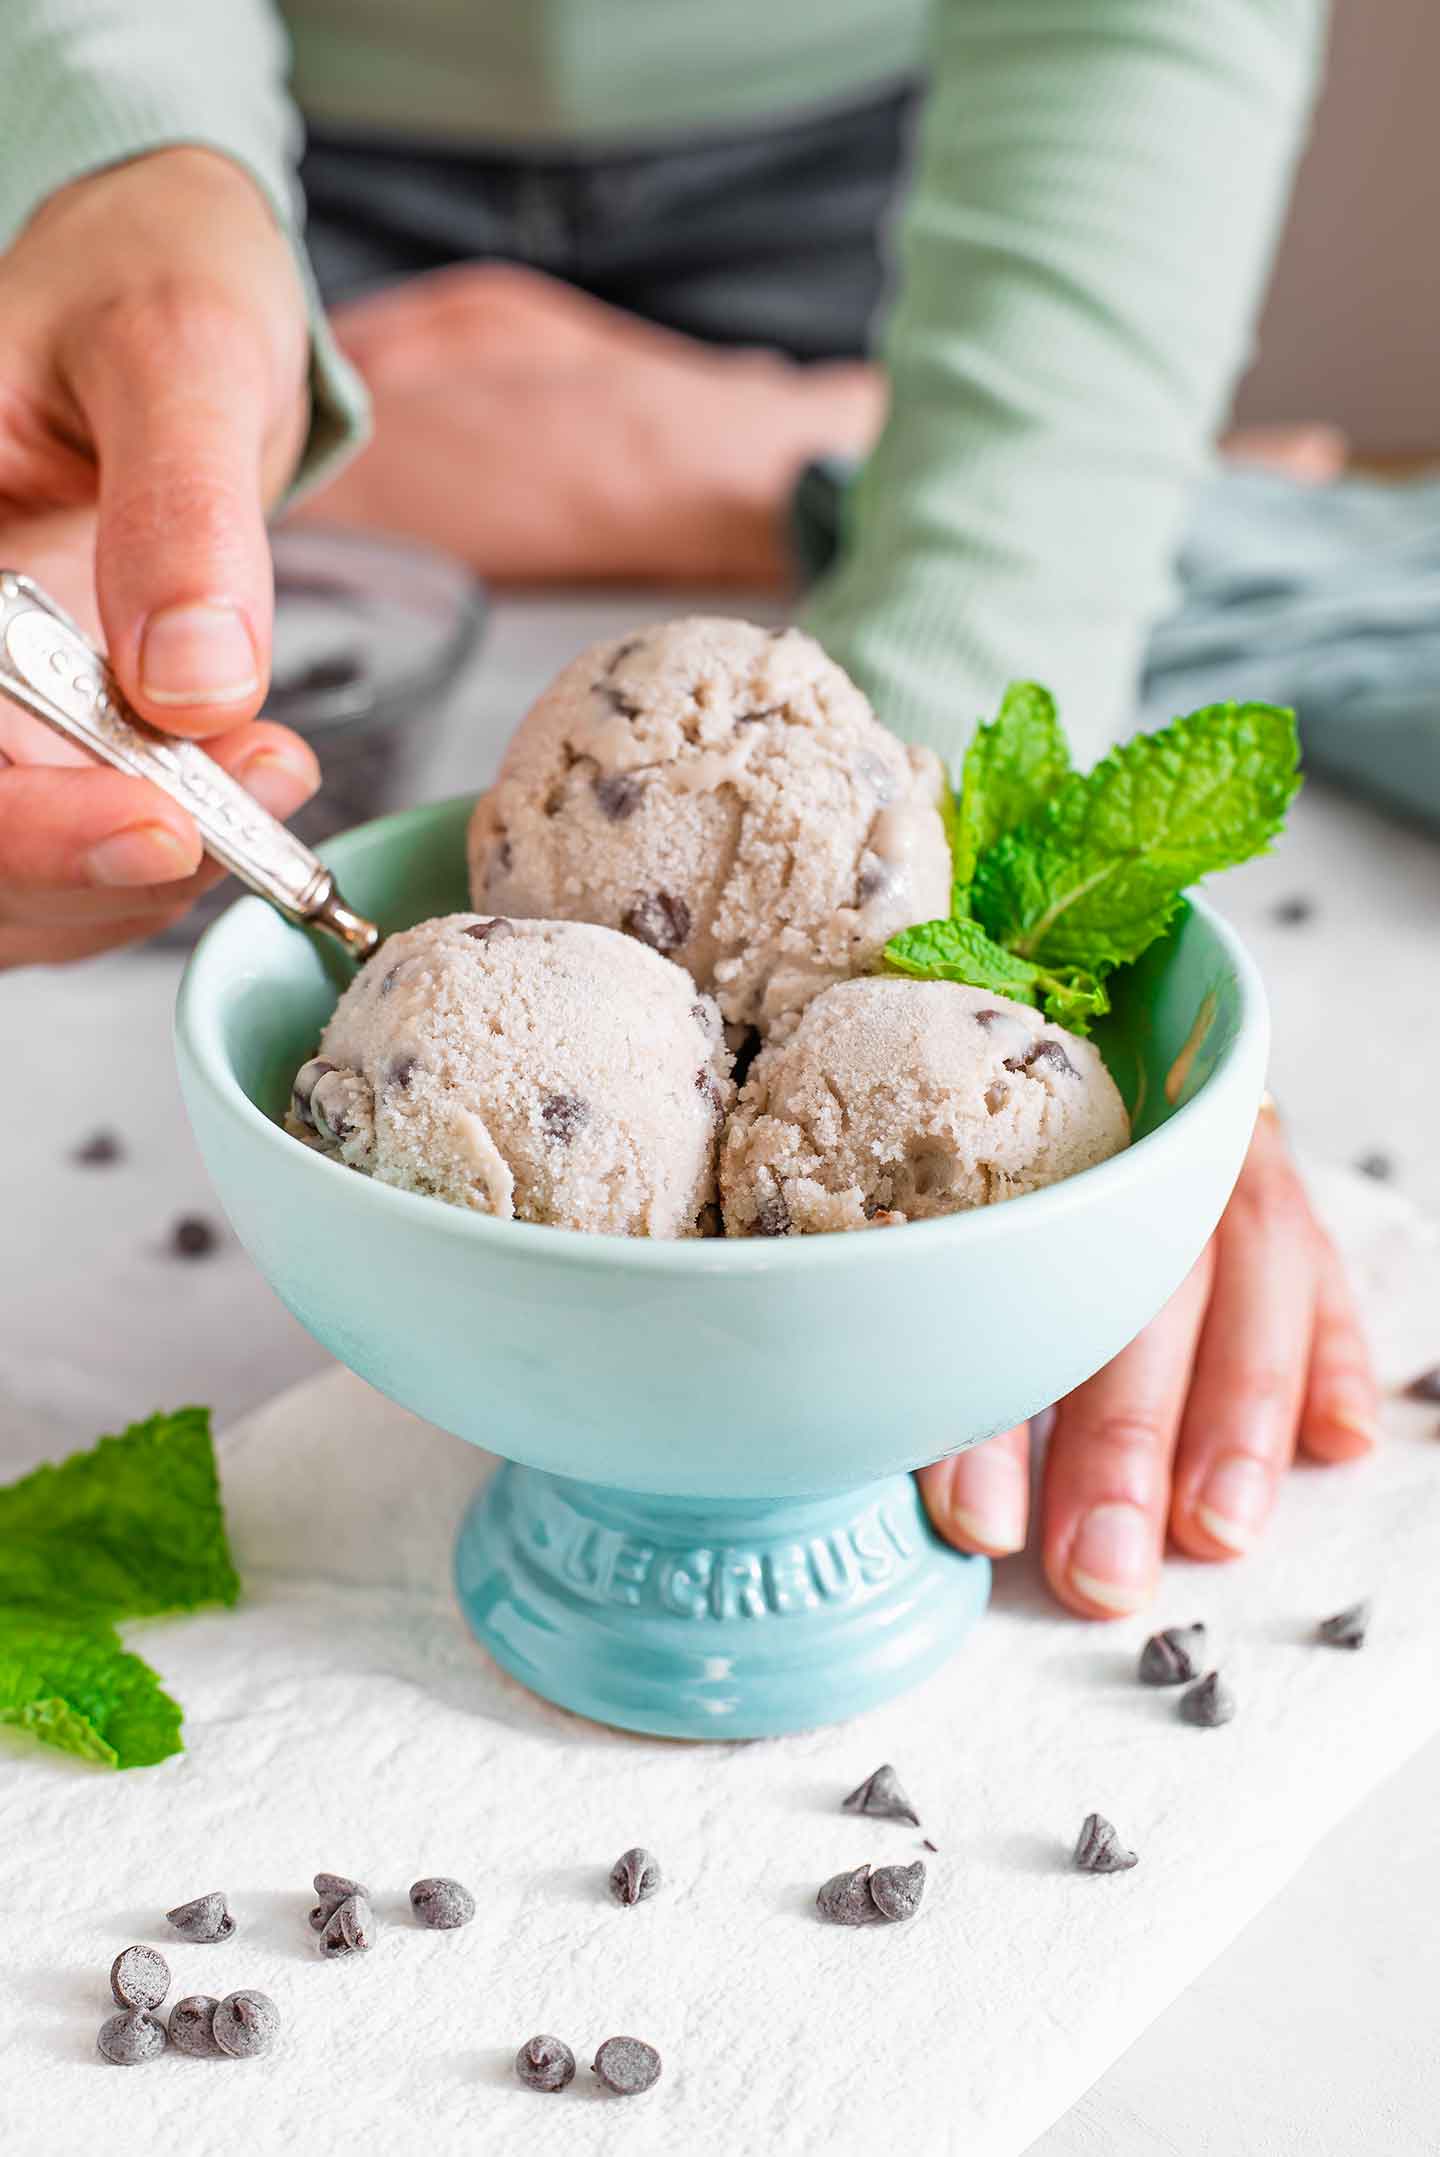 Side view of three scoops of mint chip nice cream in a sorbet bowl. A hand dips a spoon into the creamy nice cream and chocolate chips are scattered on the tray below.